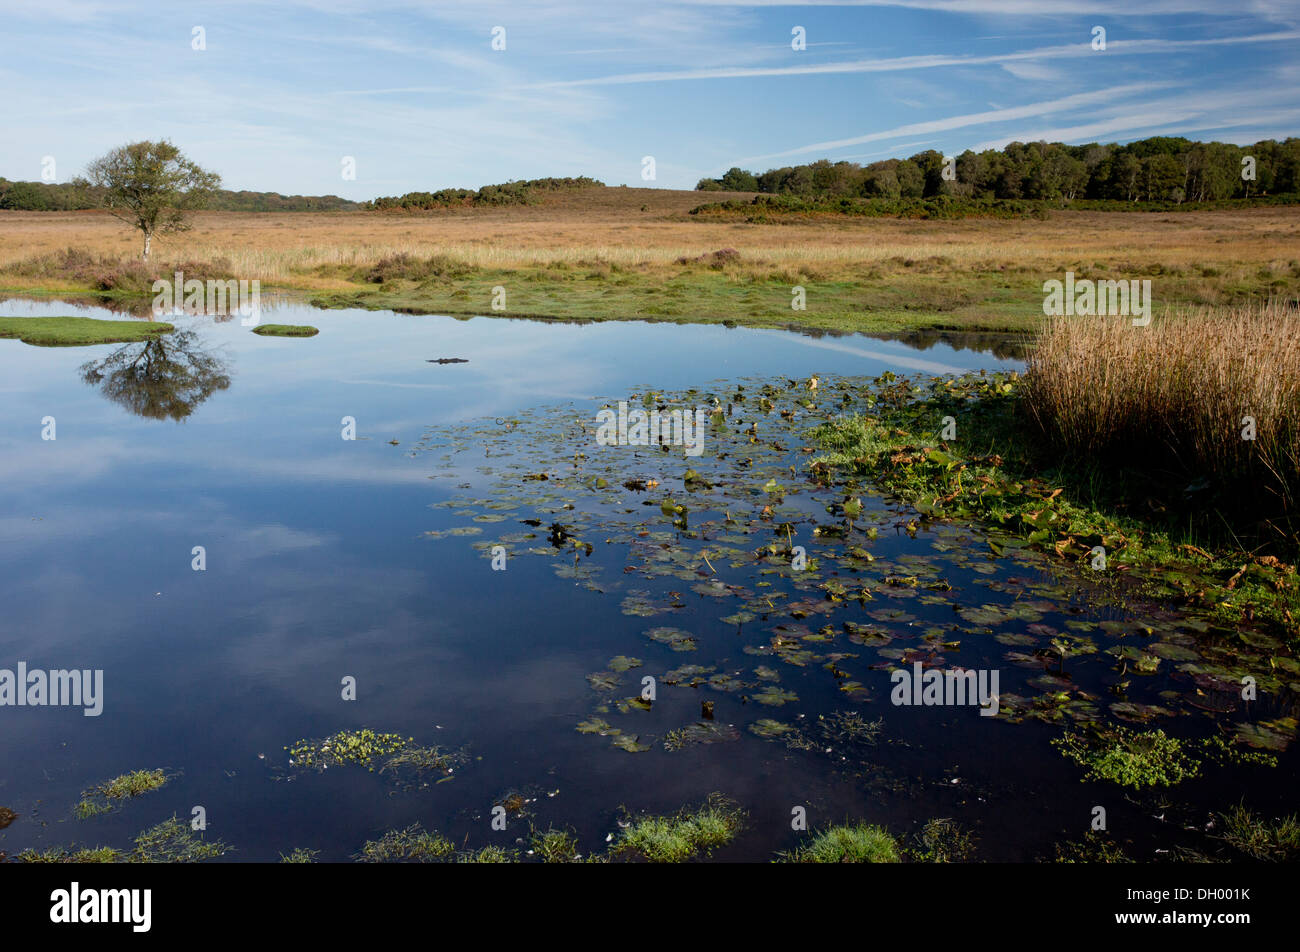 A biodiverse New Forest Pond, Burley Moor East pond, near Burley, Hants. Stock Photo